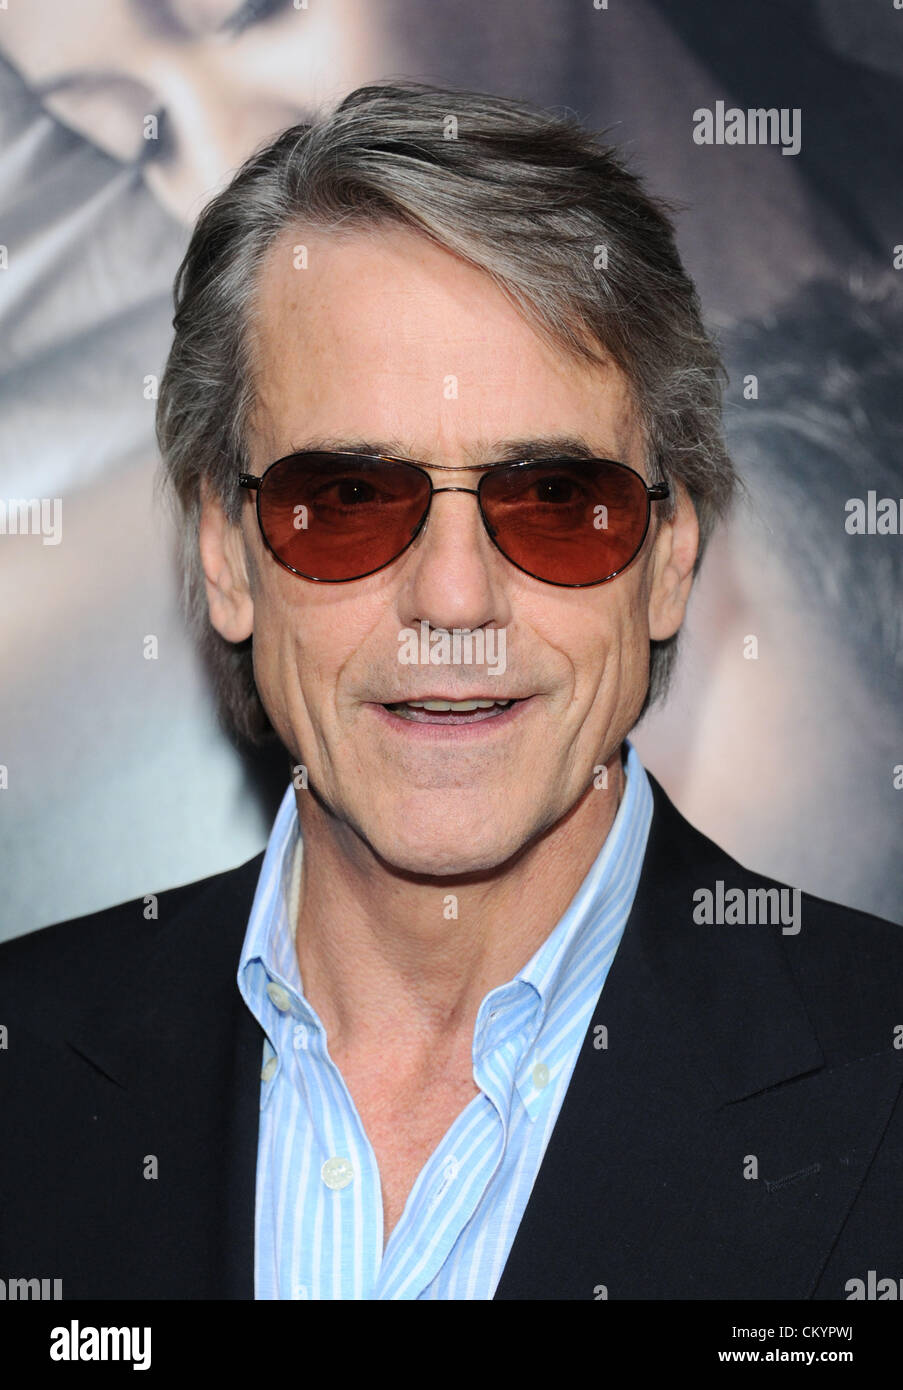 Los Angeles, USA. 4th September 2012. Jeremy Irons at 'The Words' film premiere, Los Angeles, USA Stock Photo